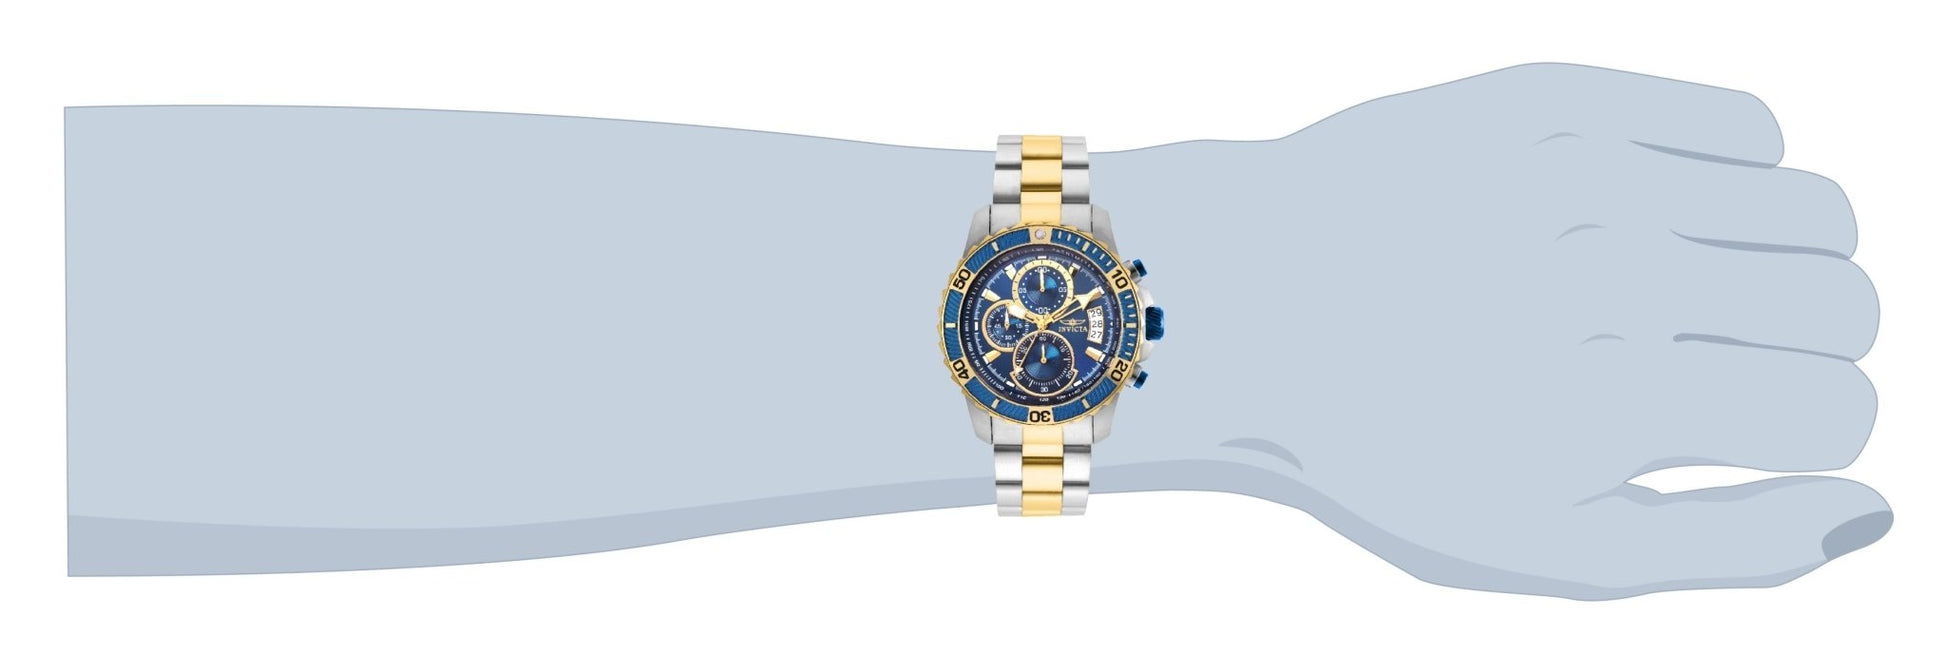 Invicta Pro Diver SCUBA 22415 featuring blue dial and gold-tone bezel worn on wrist